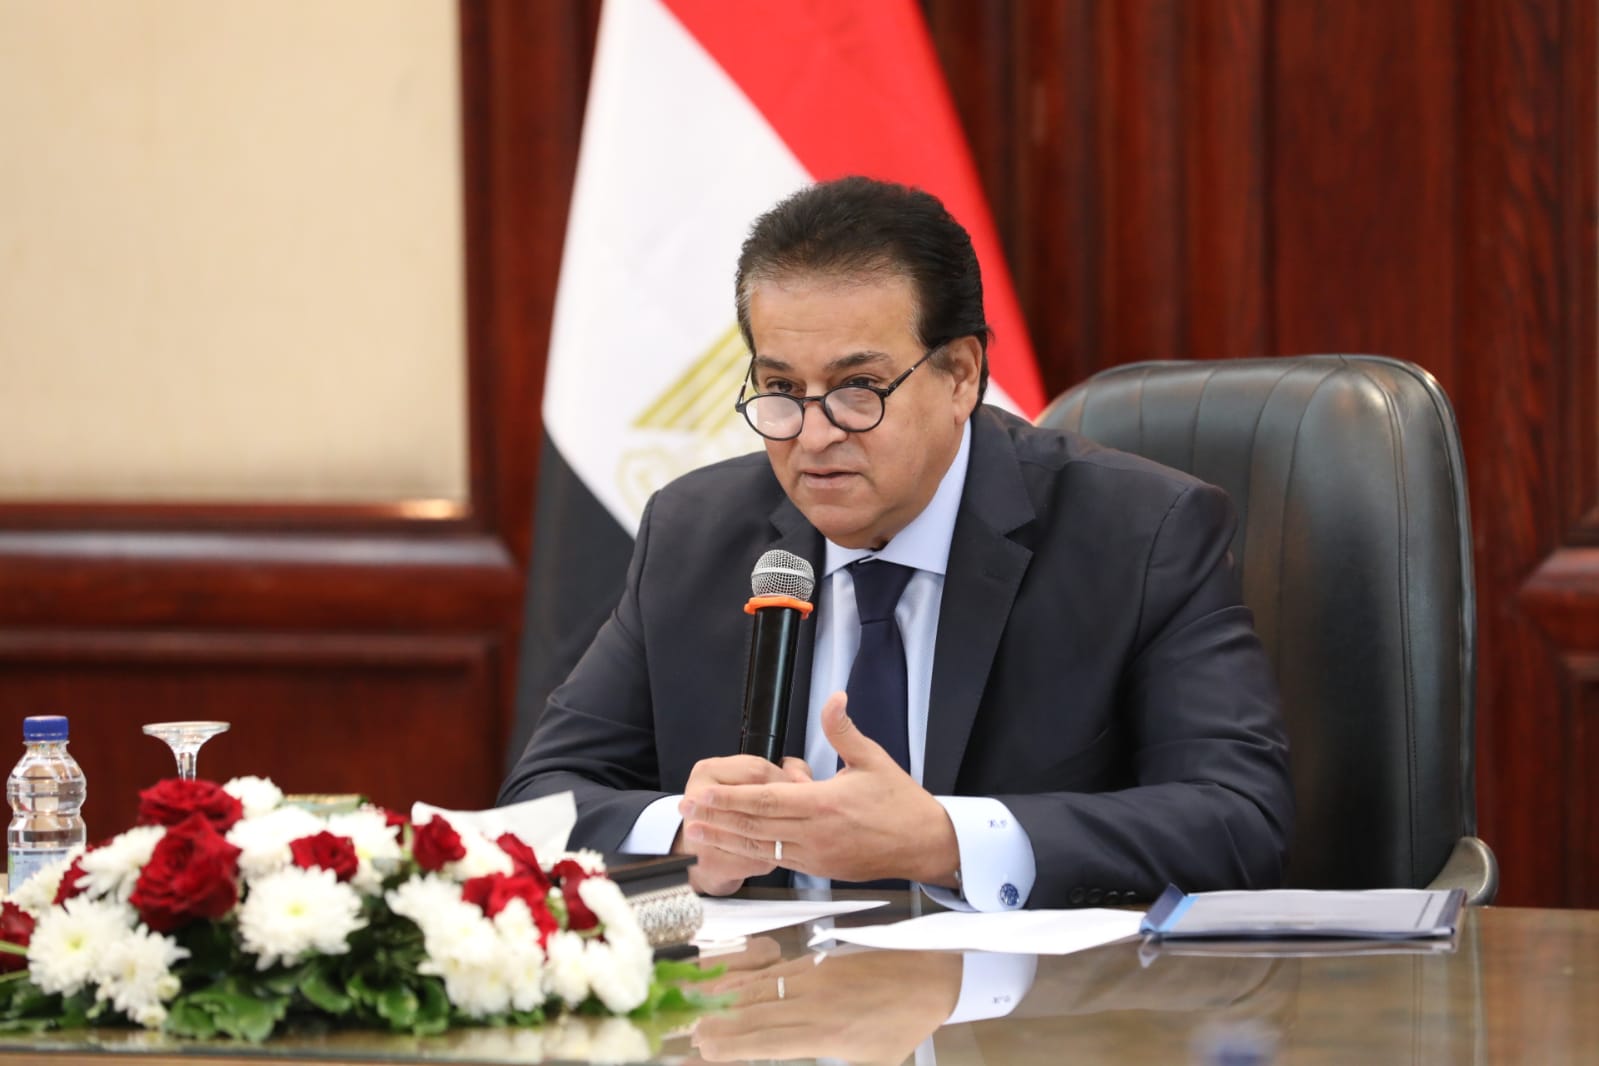 The Minister of Health congratulates Dr. Neama Abed on his appointment as the new representative of the World Health Organization in Egypt